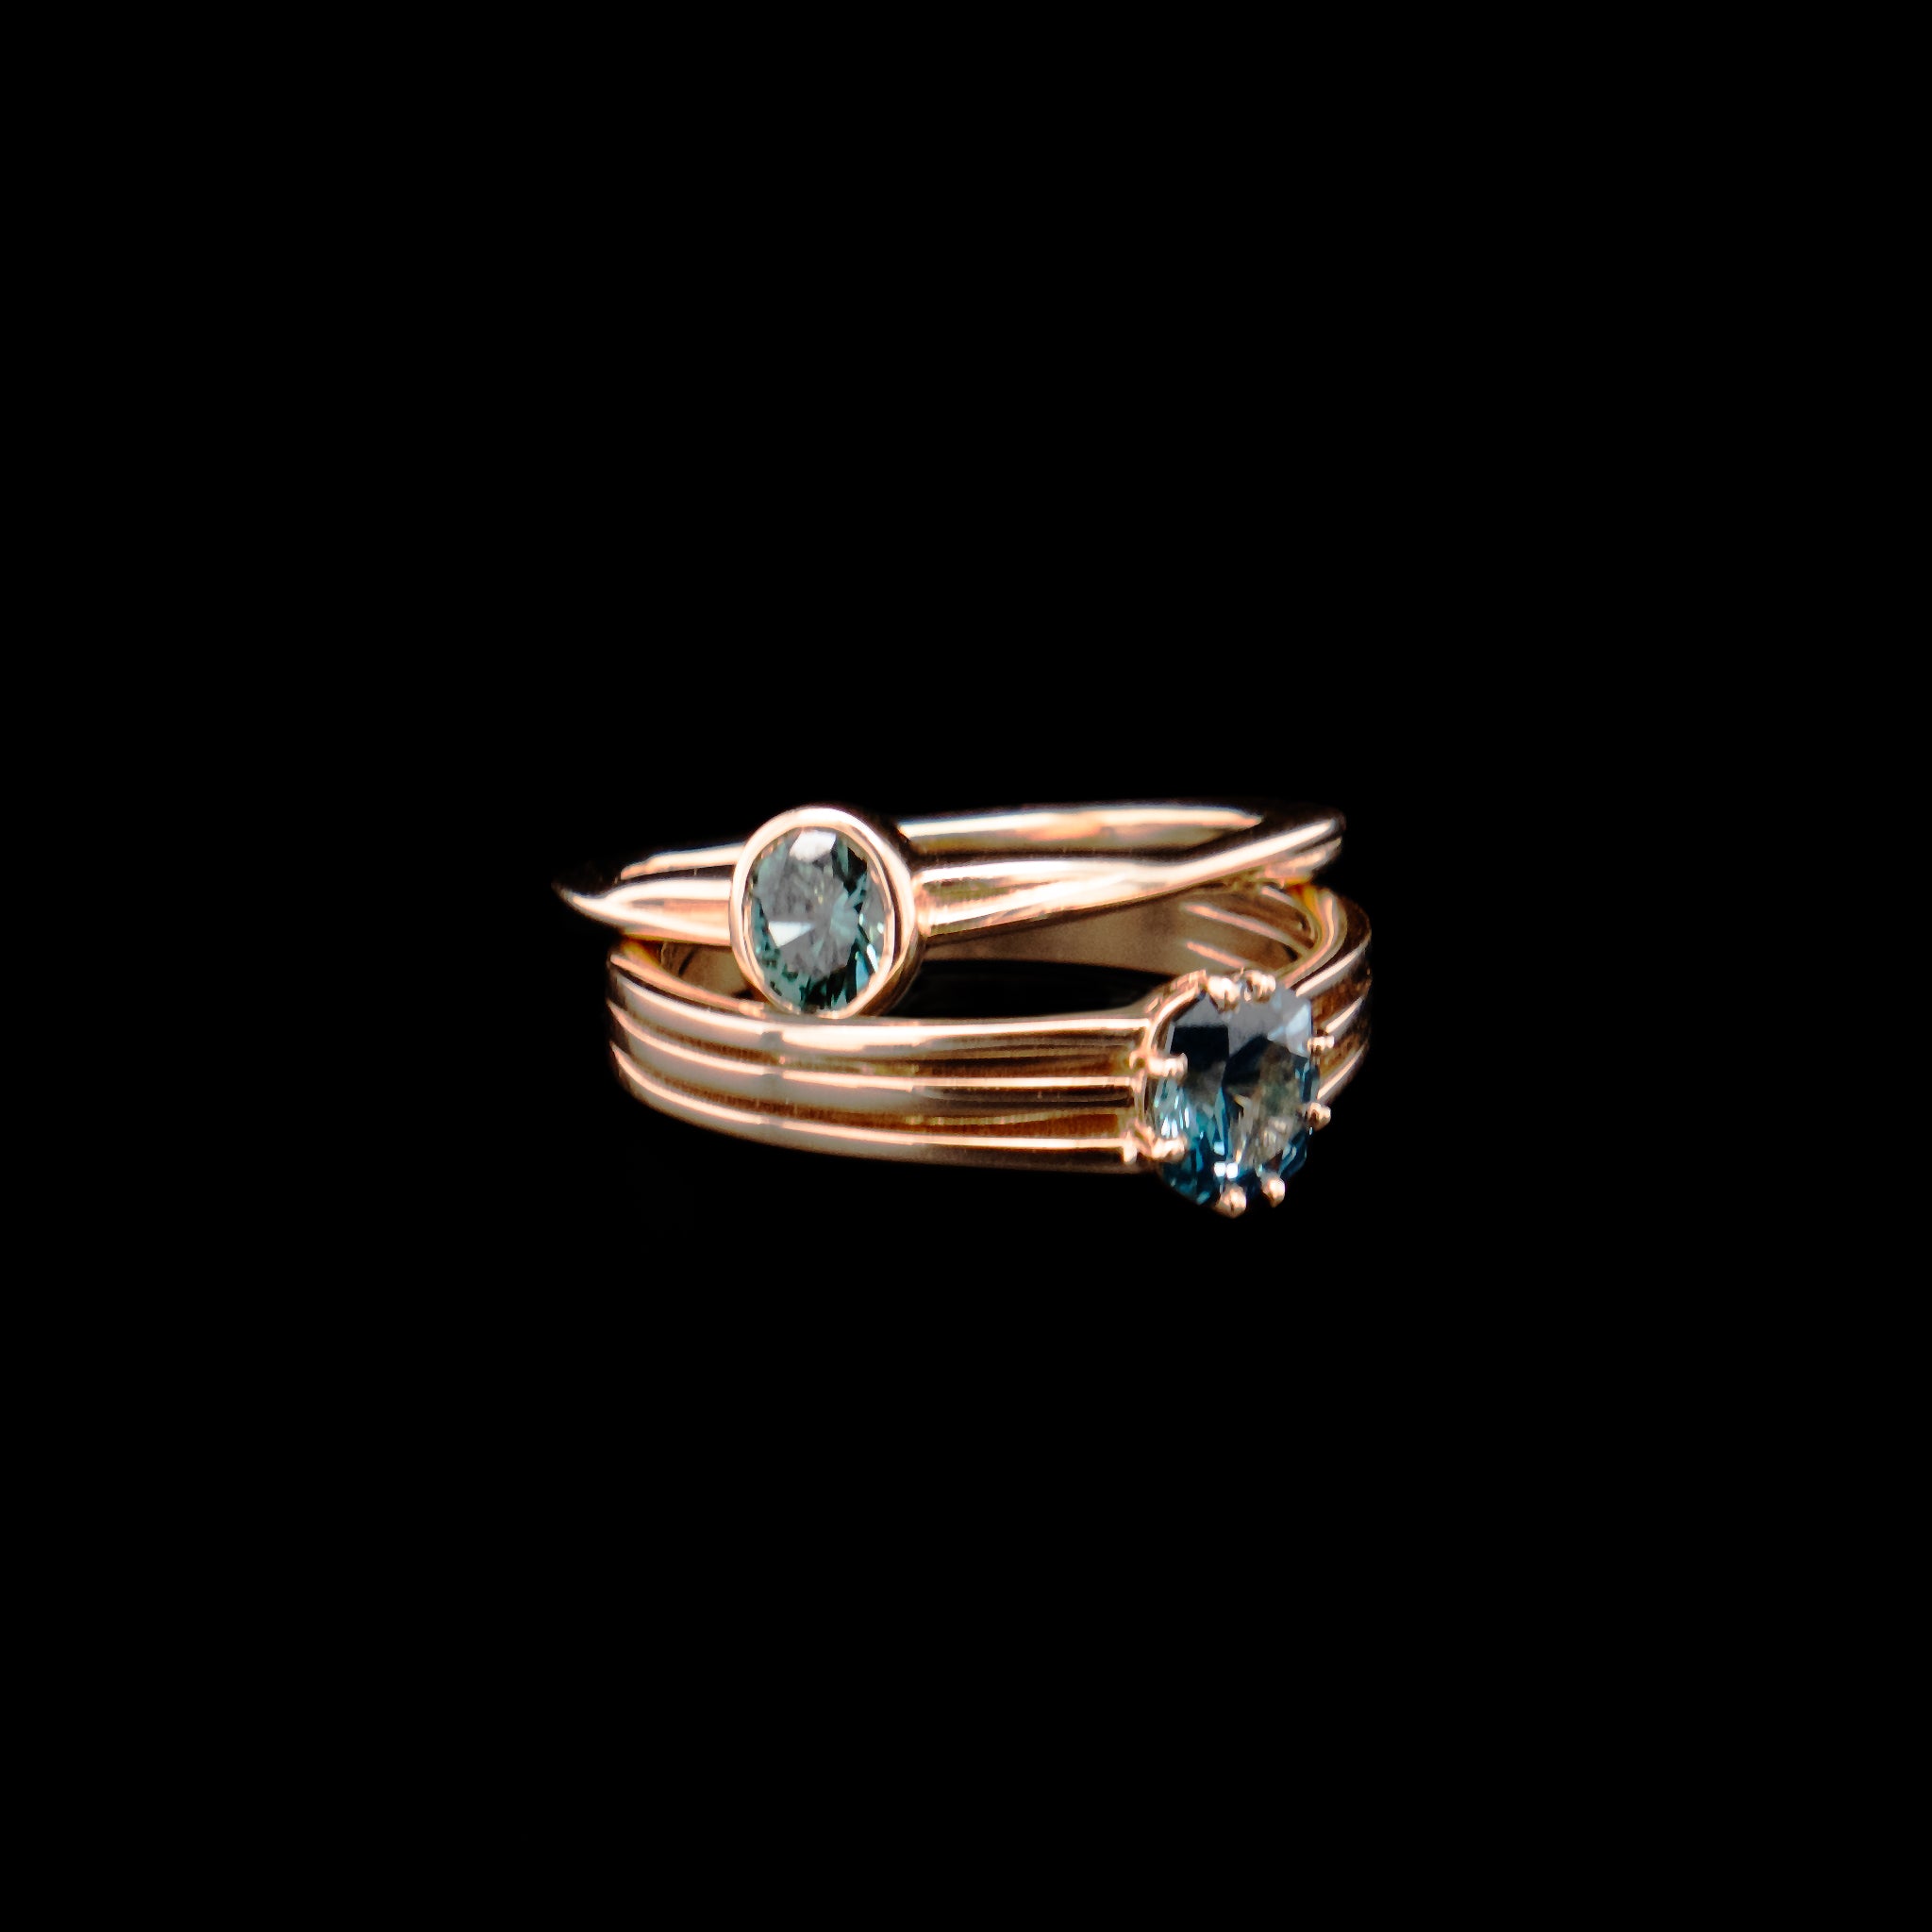 14k gold rings with montana sapphires